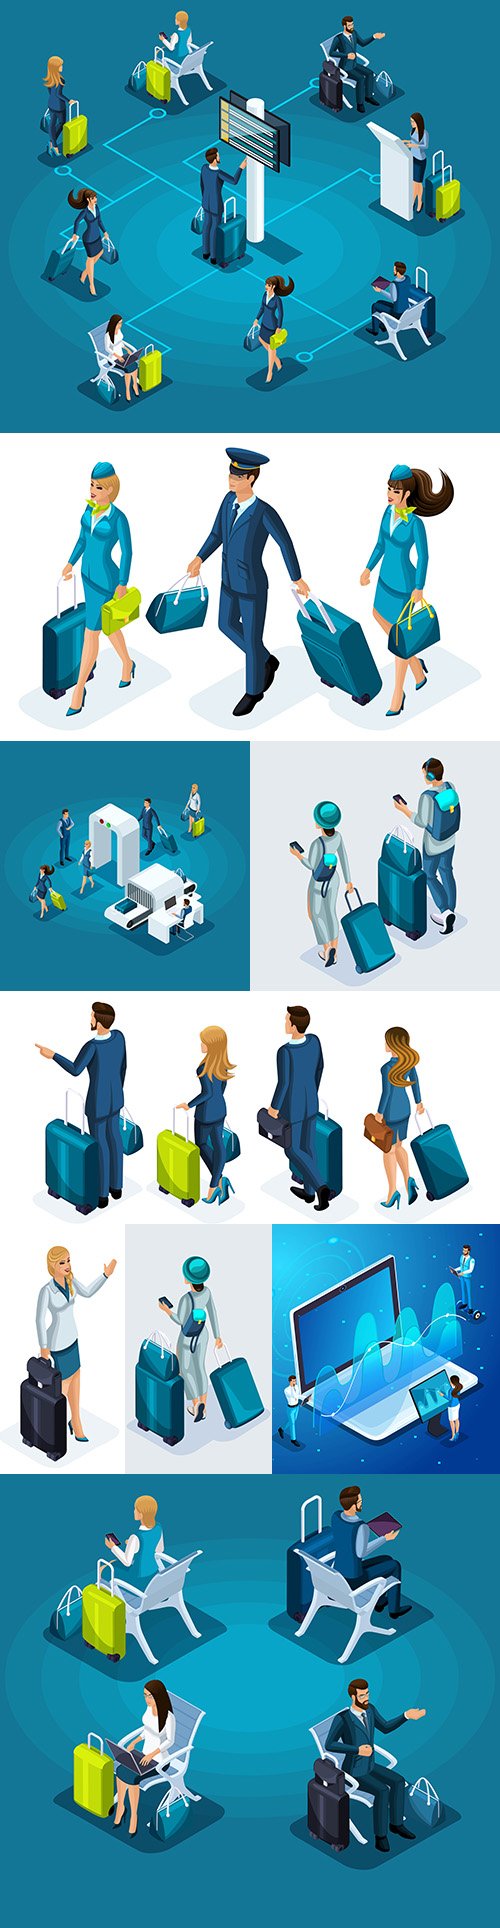 Girl and man at airport with suitcases isometric illustrations